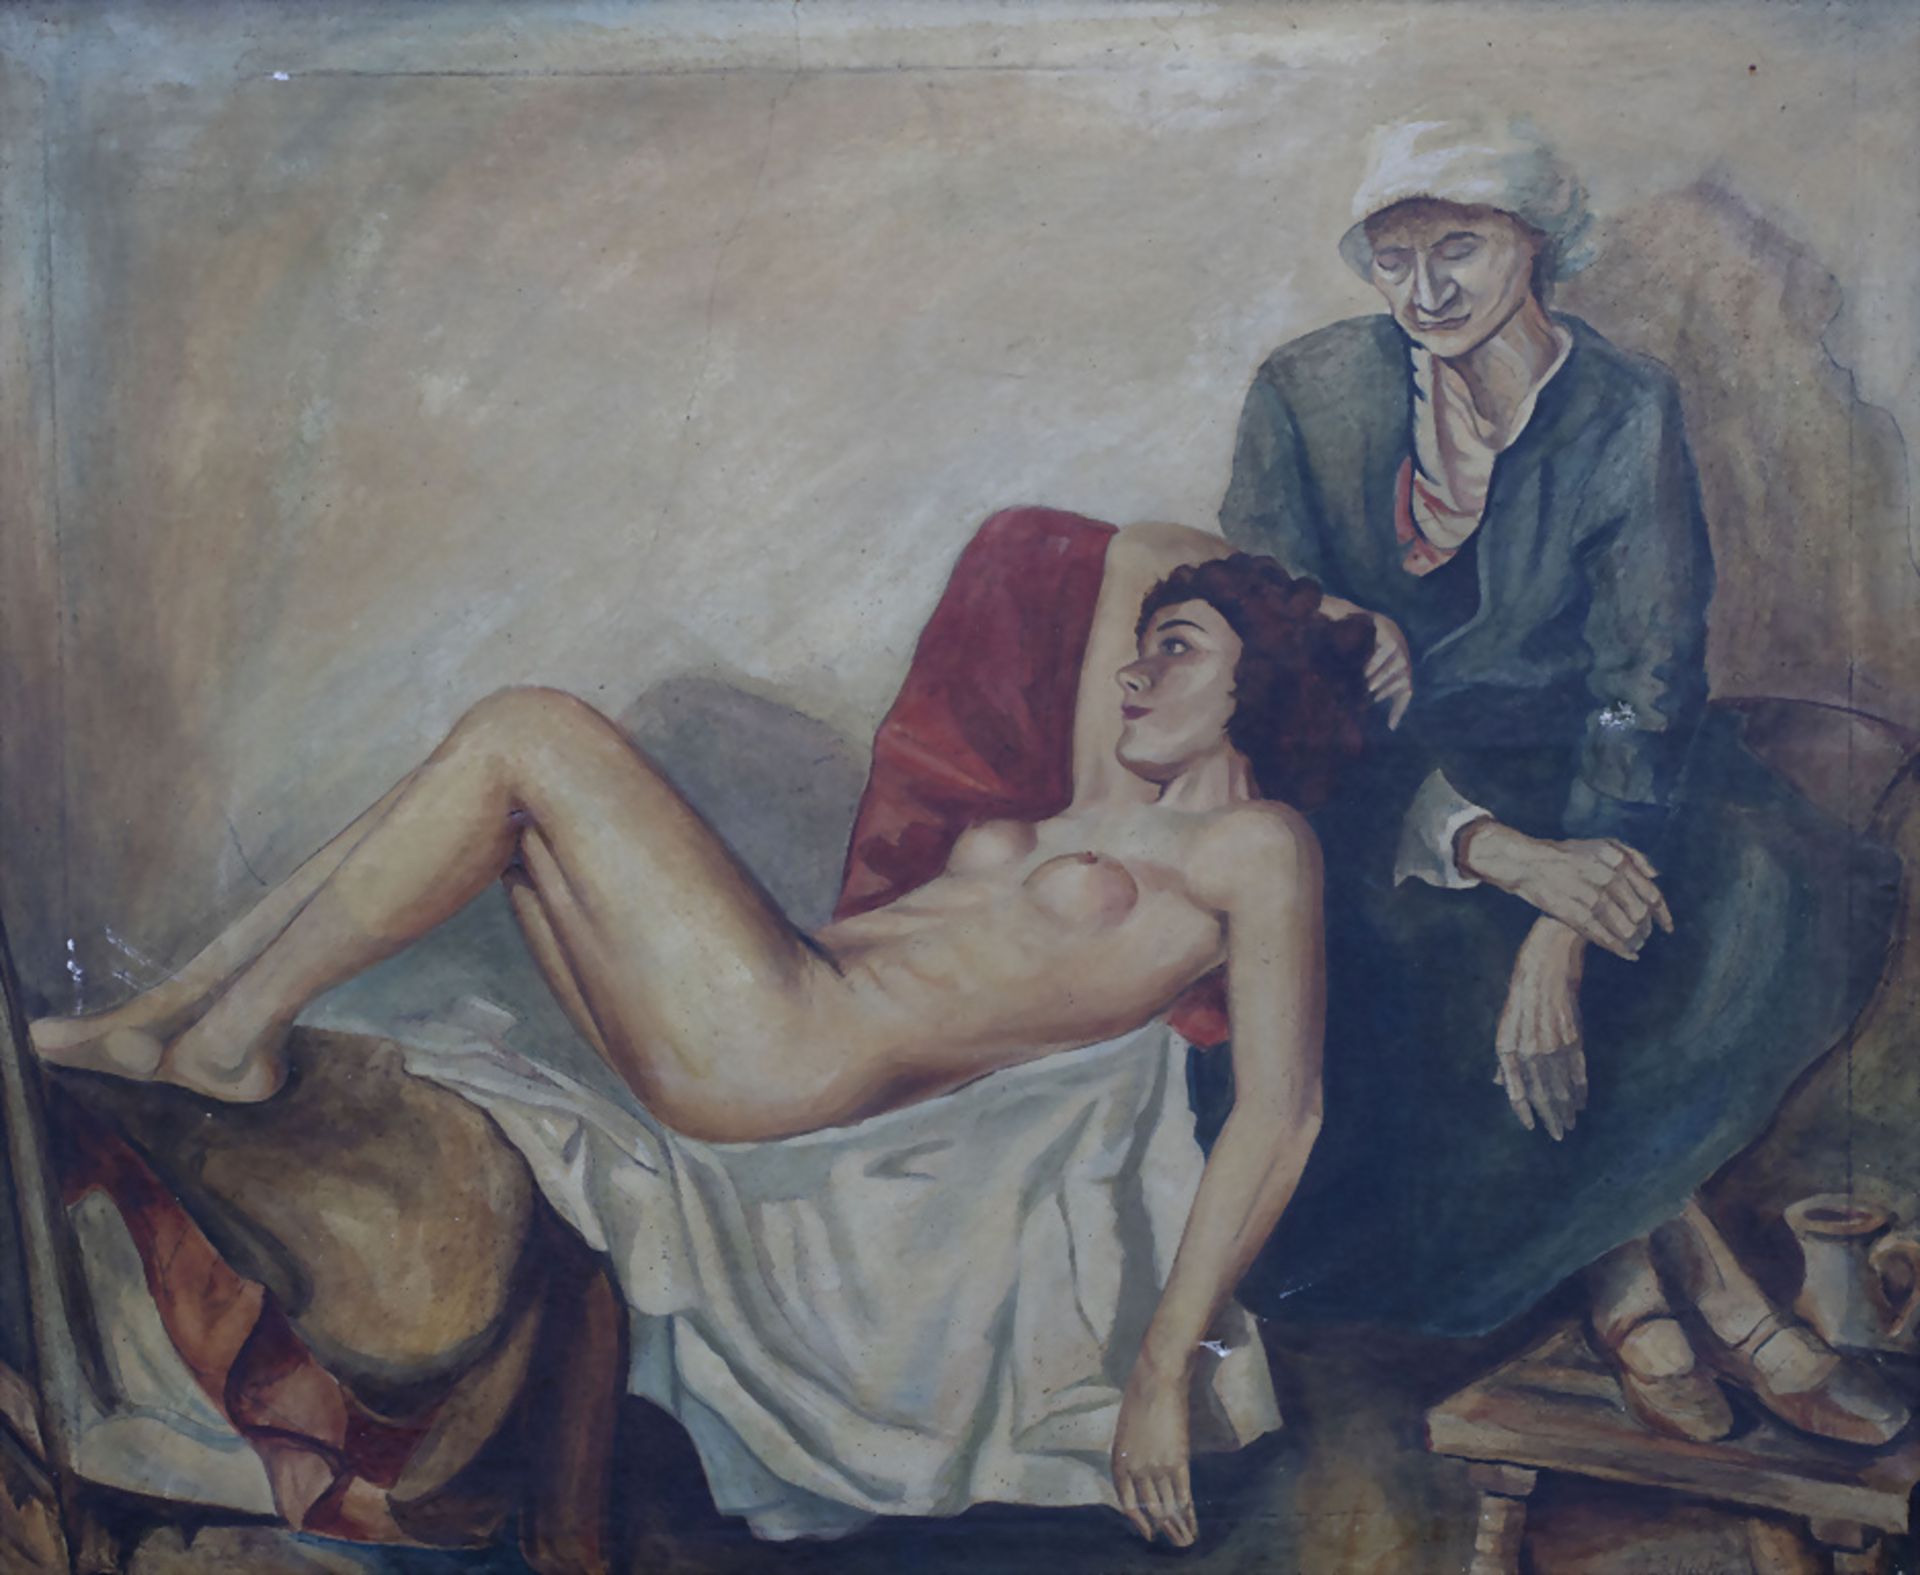 W. Schick, 'Akt mit Mutter' / A nude with mother, 1941